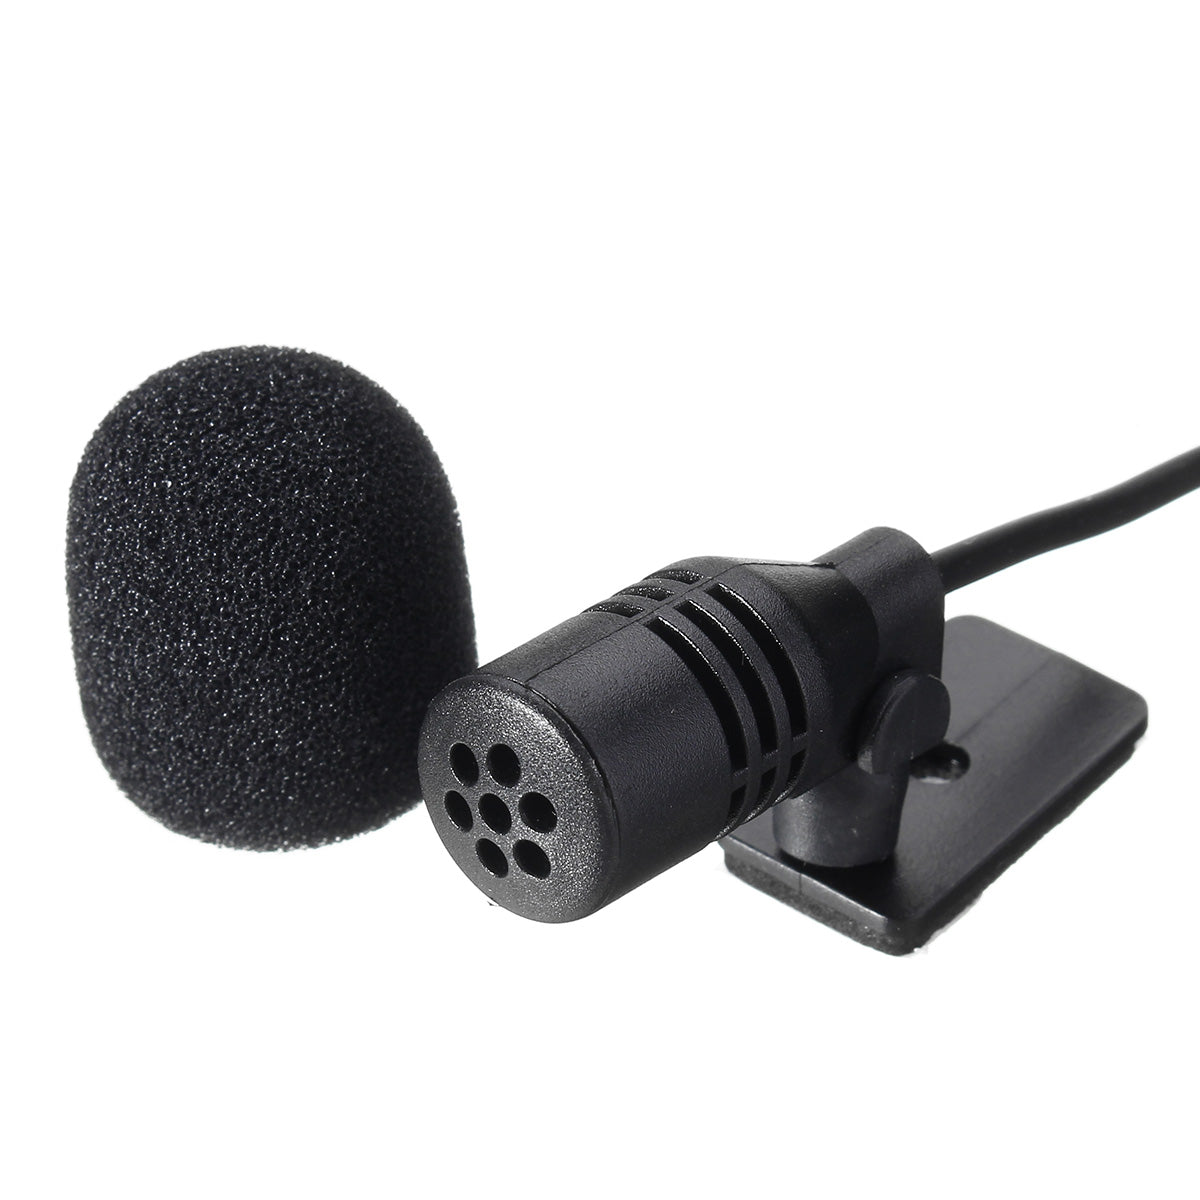 3.5mm Hands Free Stereo Microphone External Car GPS Bluetooth Enabled Audio Chat